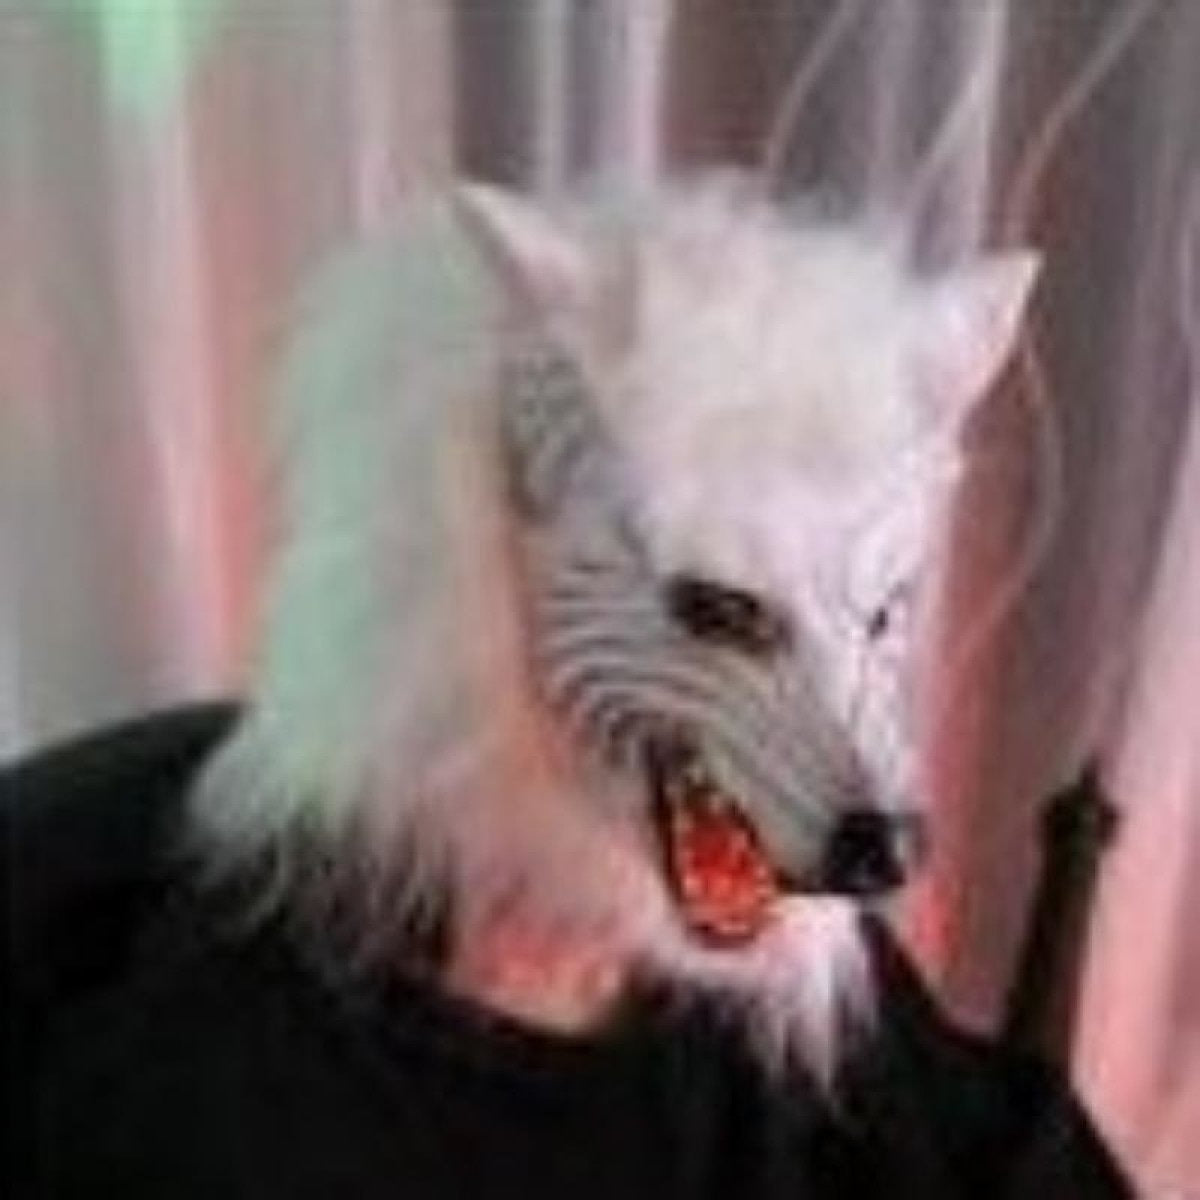 Props Party Dress Up Horror White Wolf Scary Mask Animal Toy Horror Dog - Asia Sell.JPG